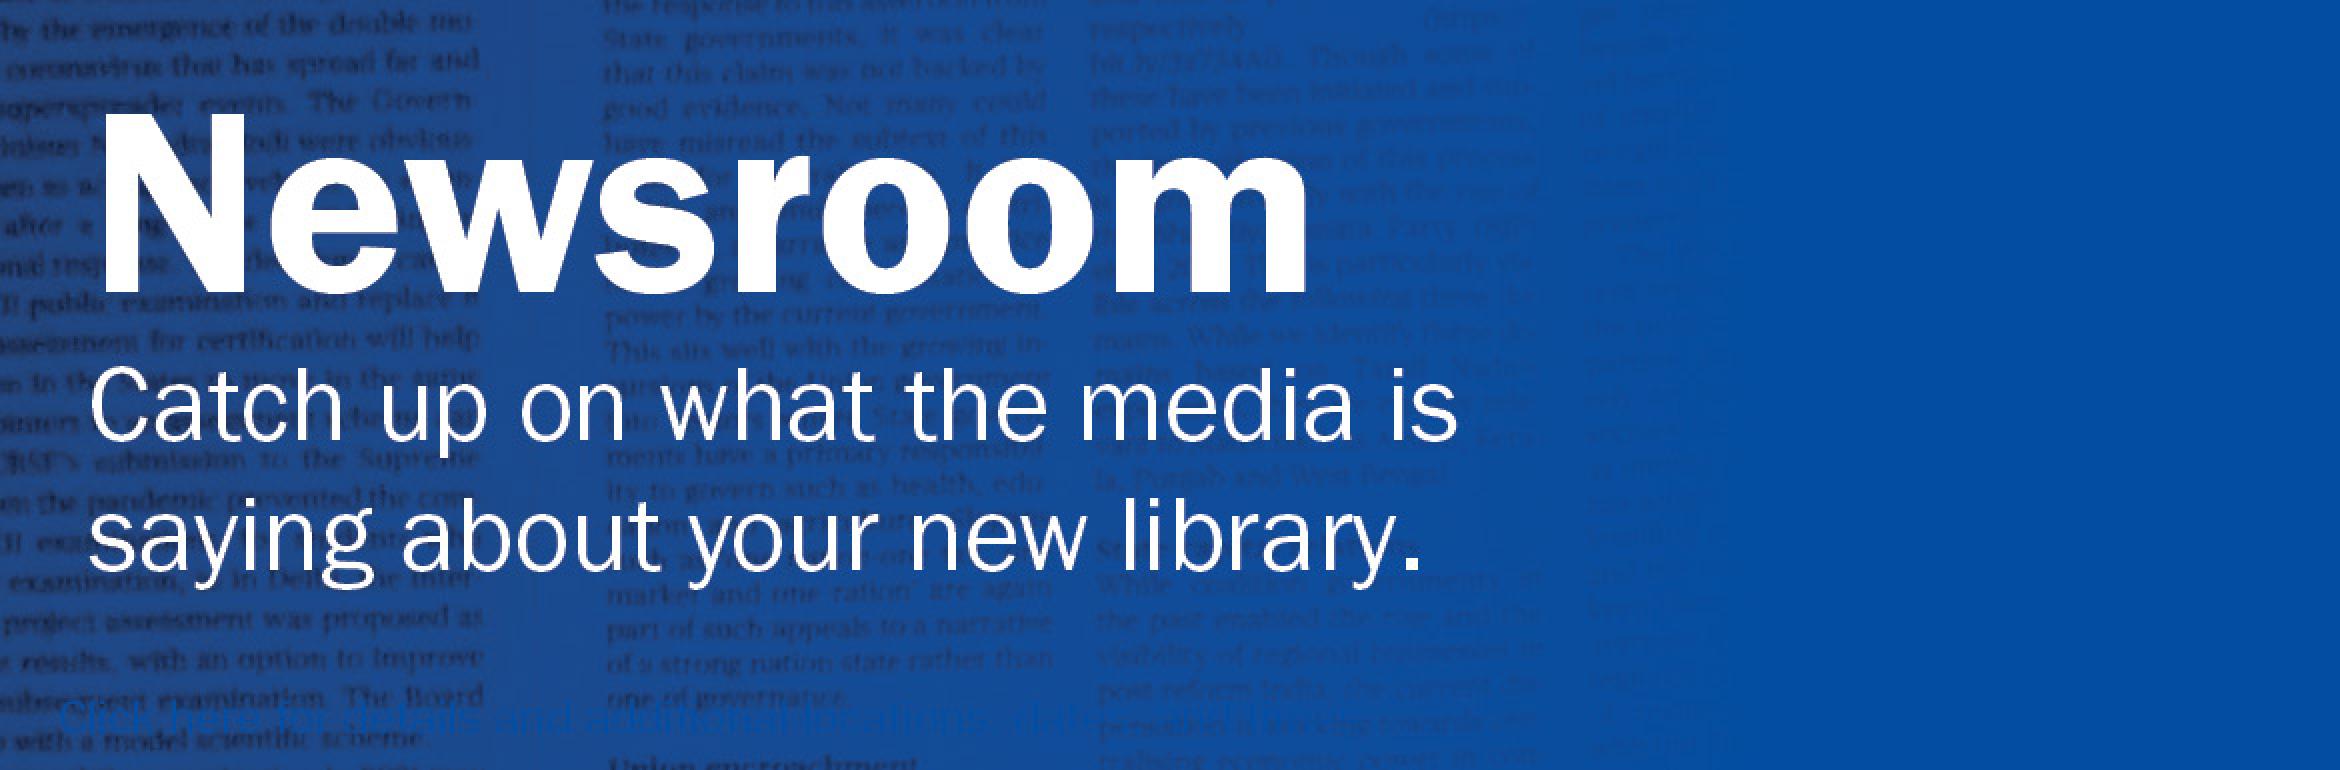 Newsroom. Catch up on what the media is saying about your new library.